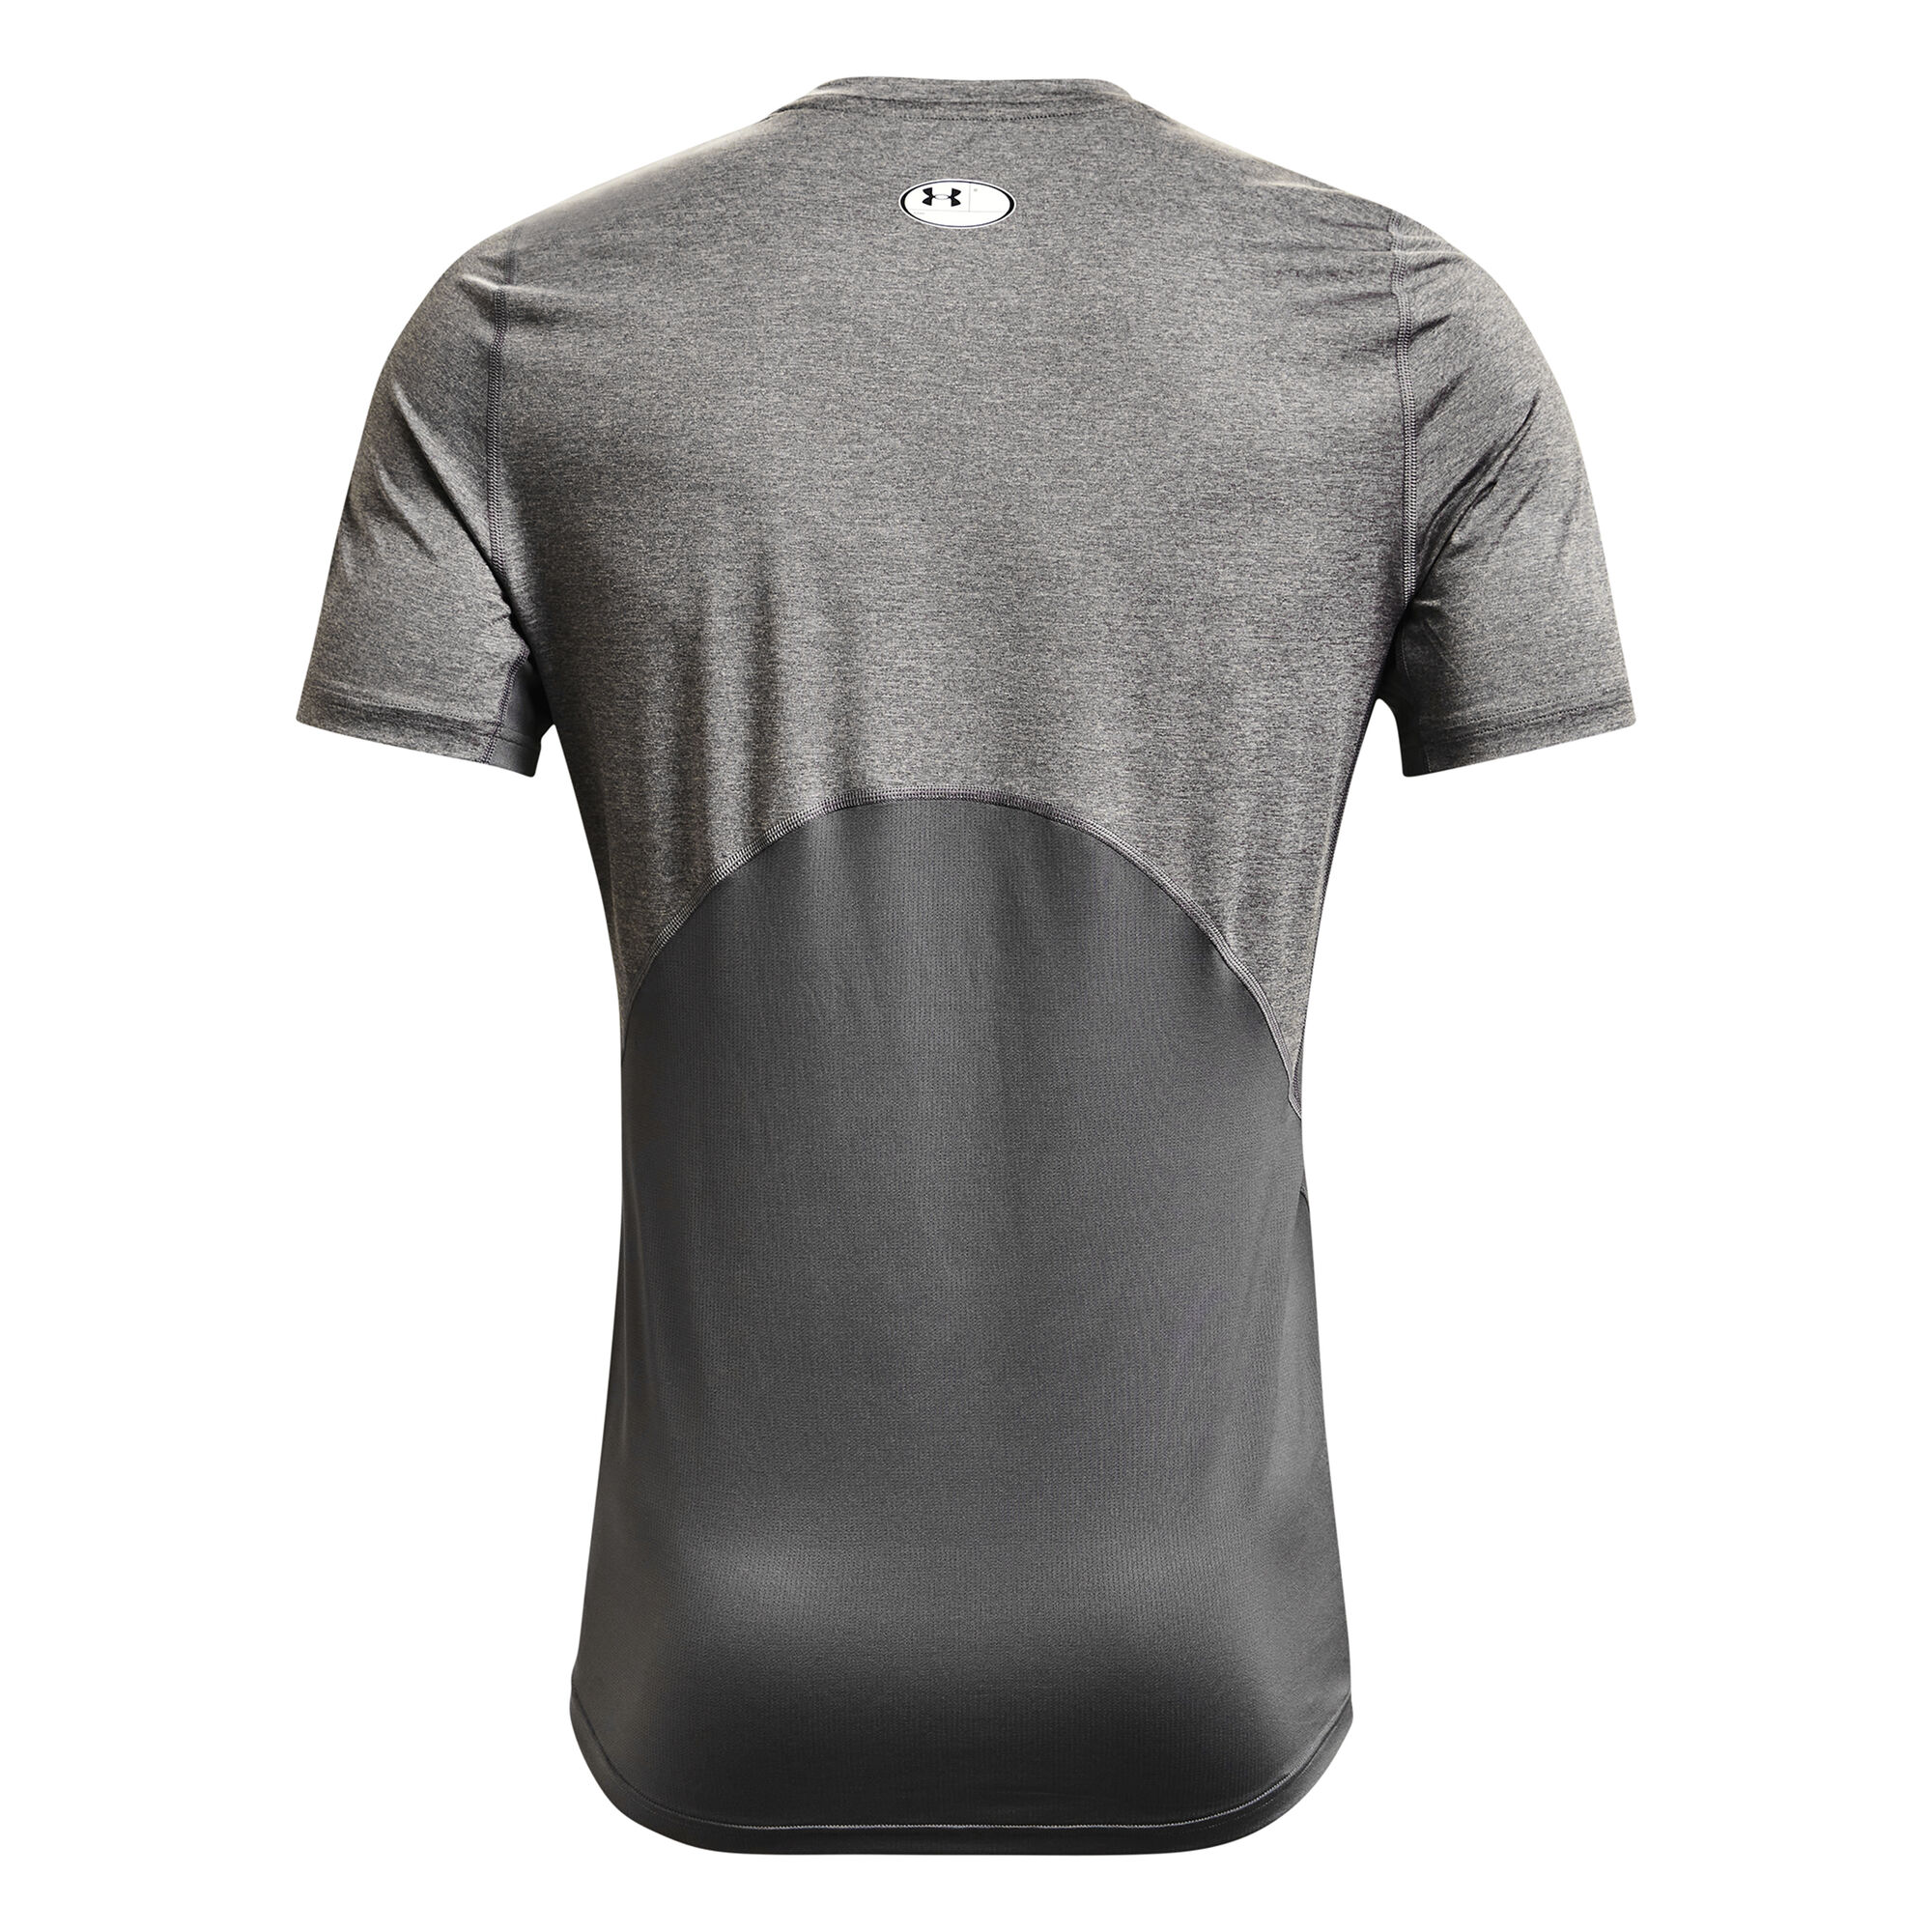 Under Armour T-Shirt - Men's HG Armour Fitted Short Sleeve – Oval